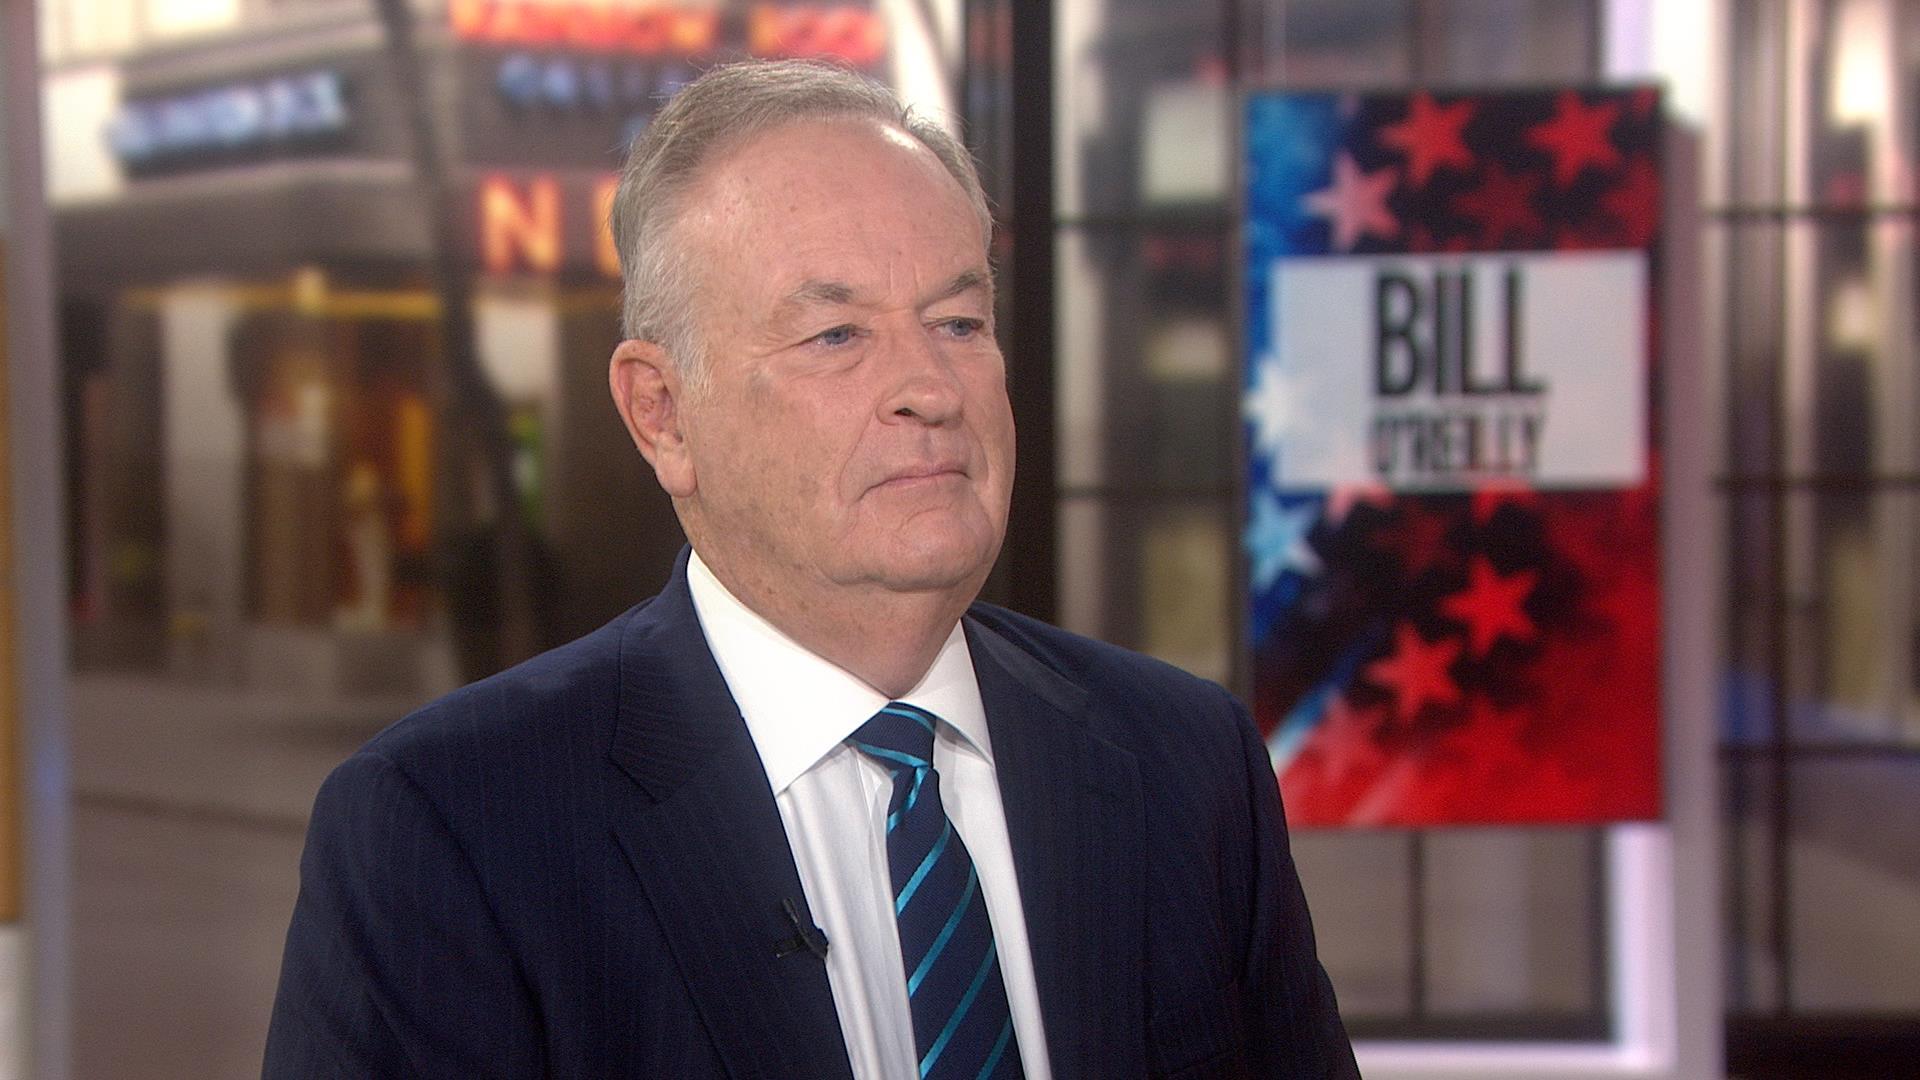 Bill O'Reilly on Hillary Clinton health scare: 'I don't understand